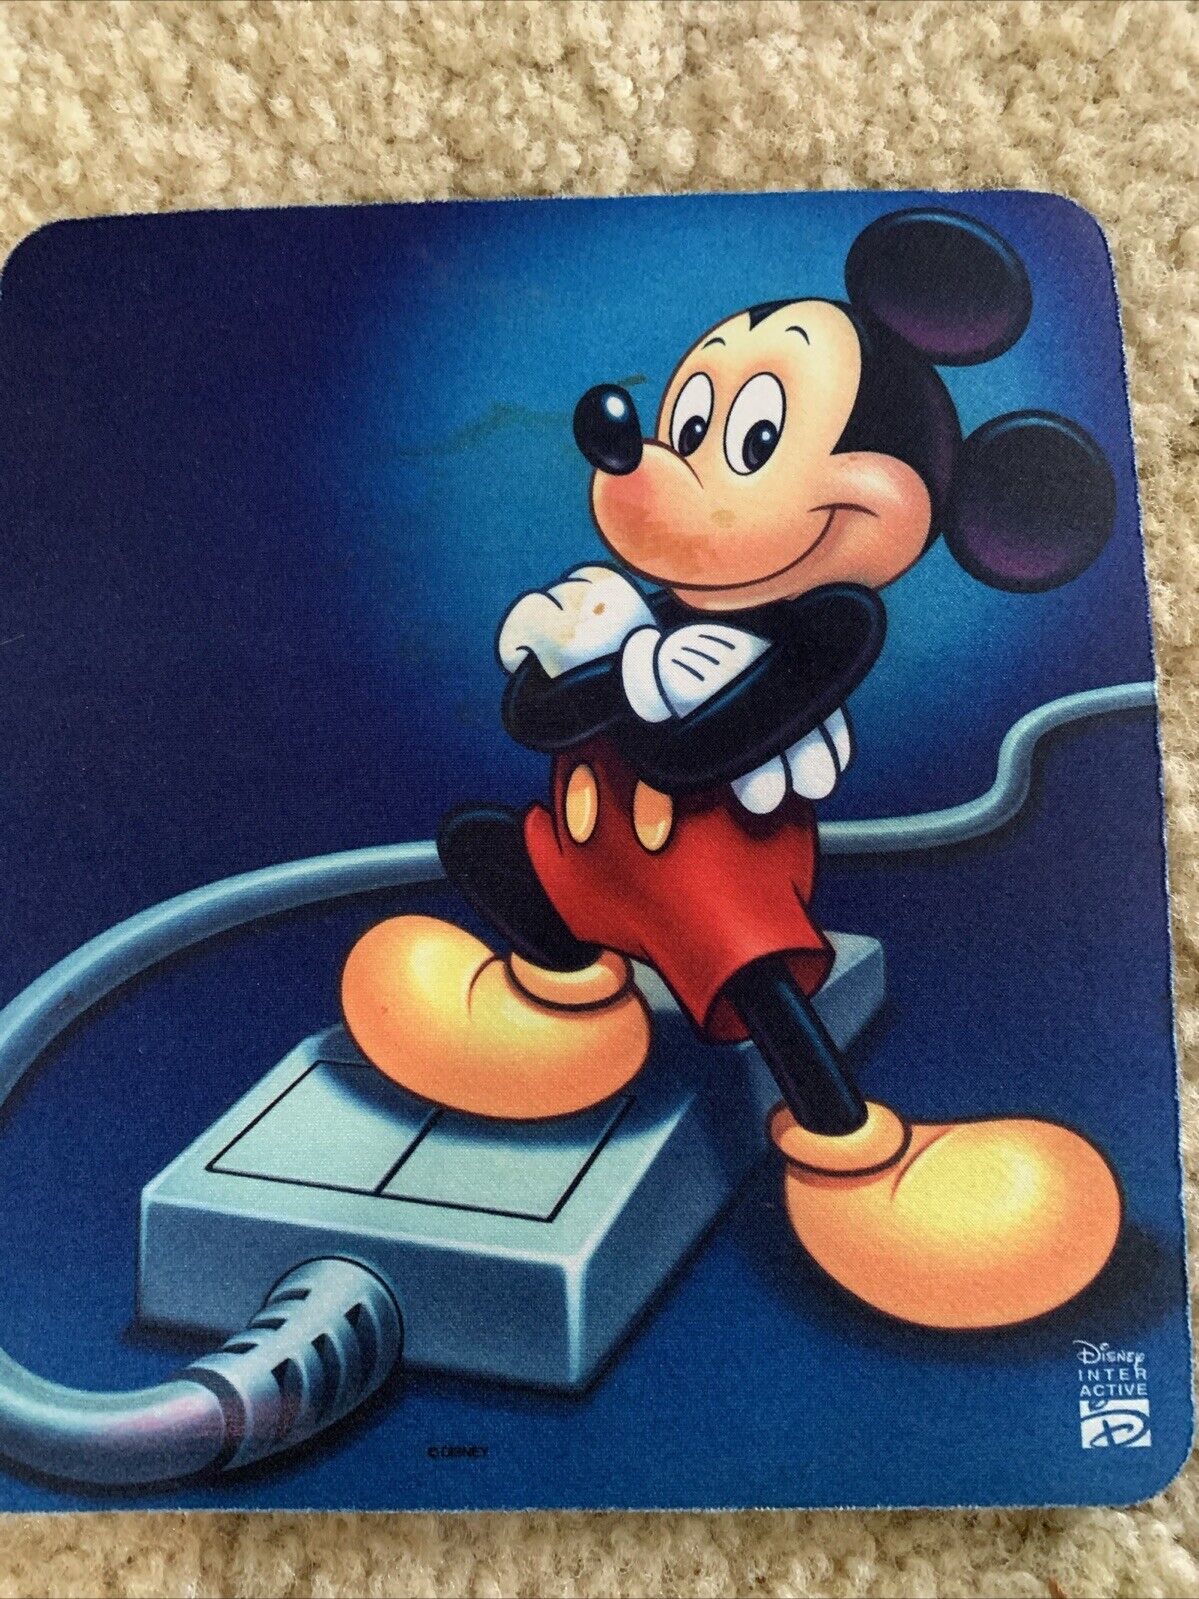 Vintage Mickey Mouse Disney Software Mousepad Computer Pad Rubber 1995